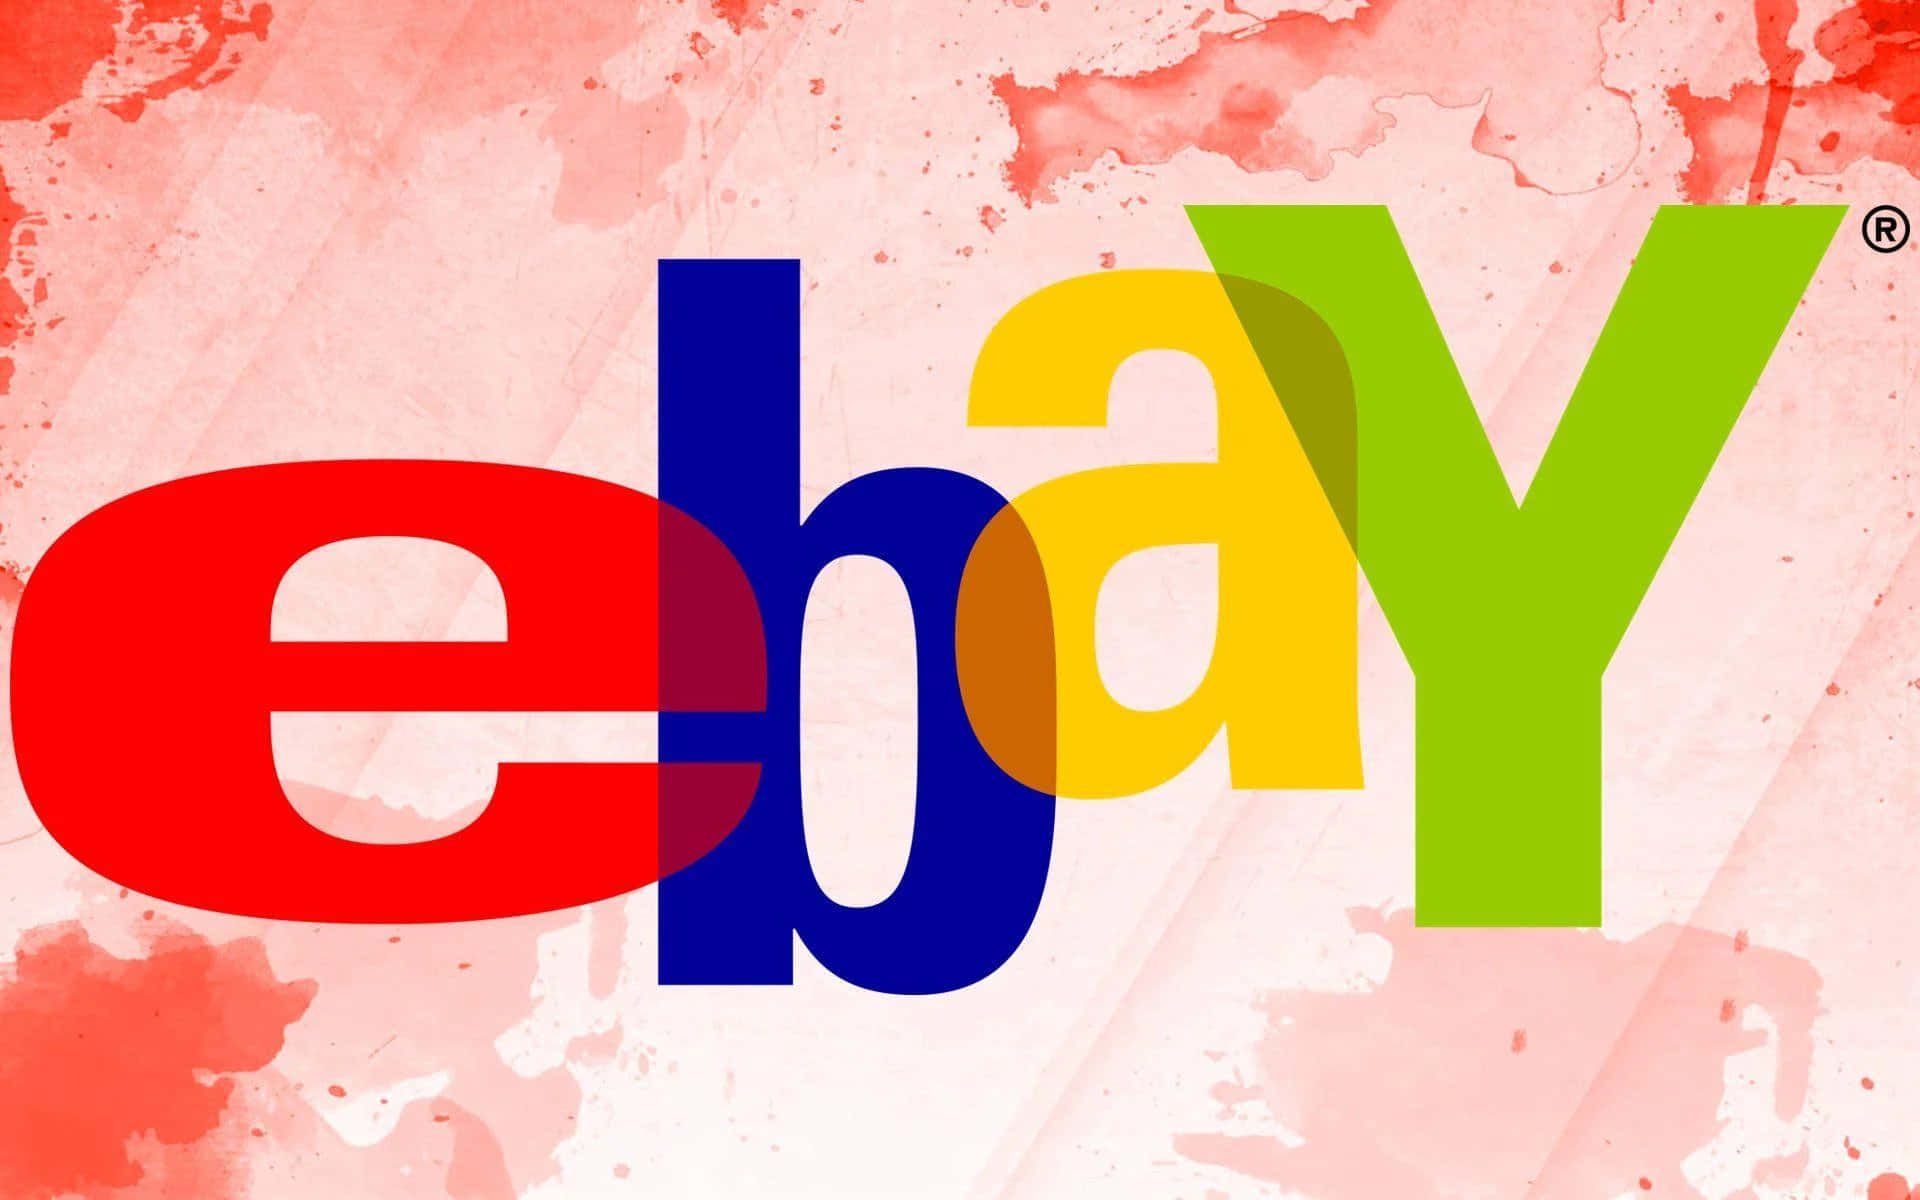 Simply Buy and Sell Anything You Want on Ebay